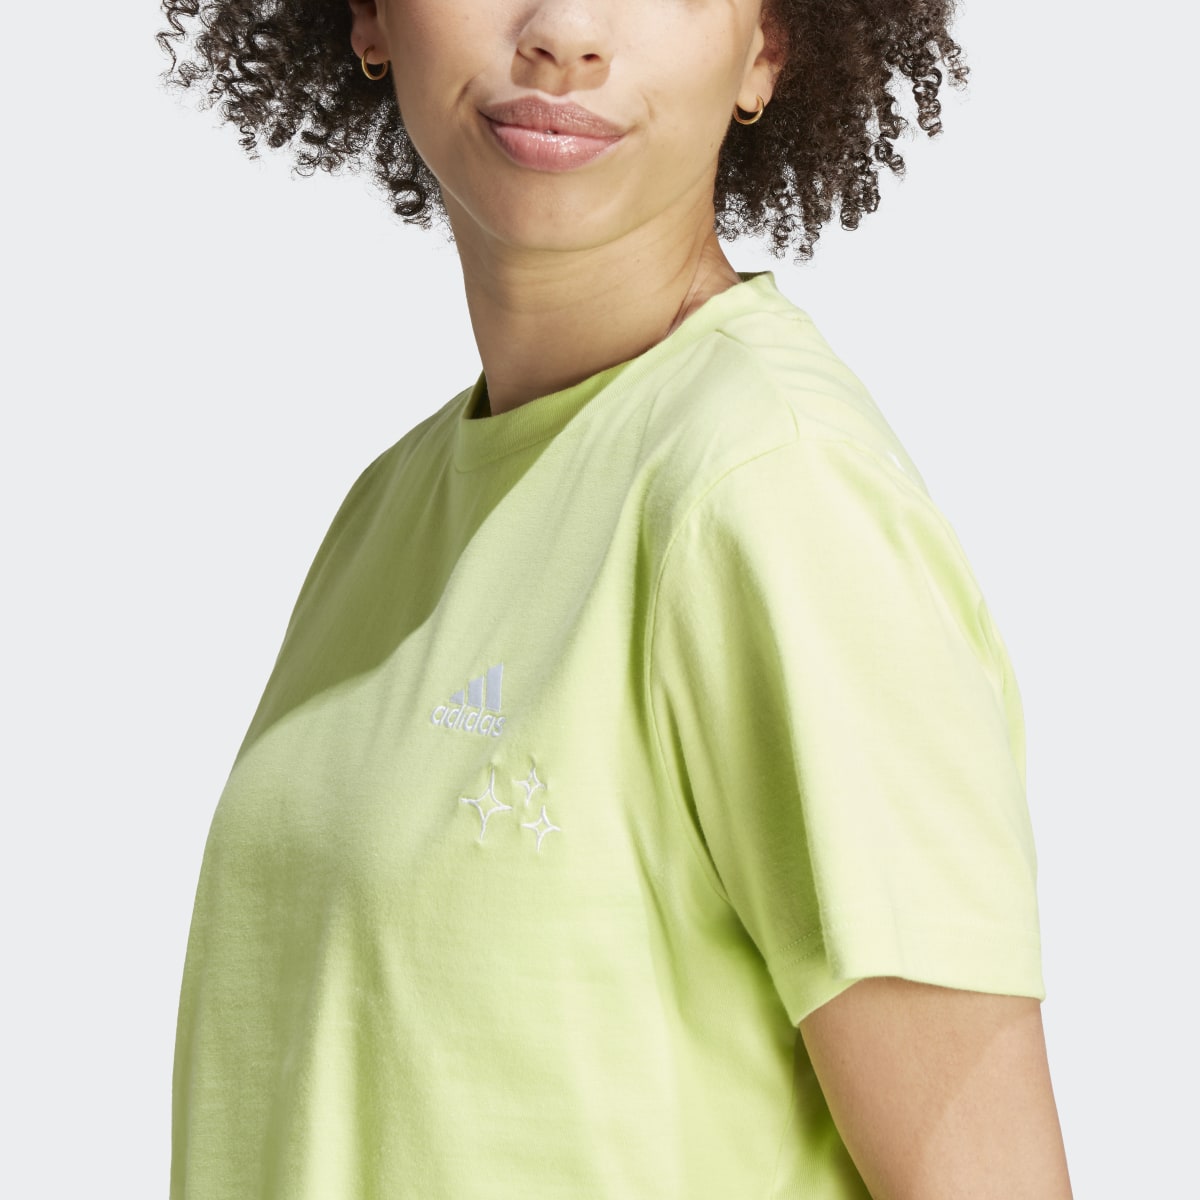 Adidas T-shirt Scribble Embroidery Crop. 7